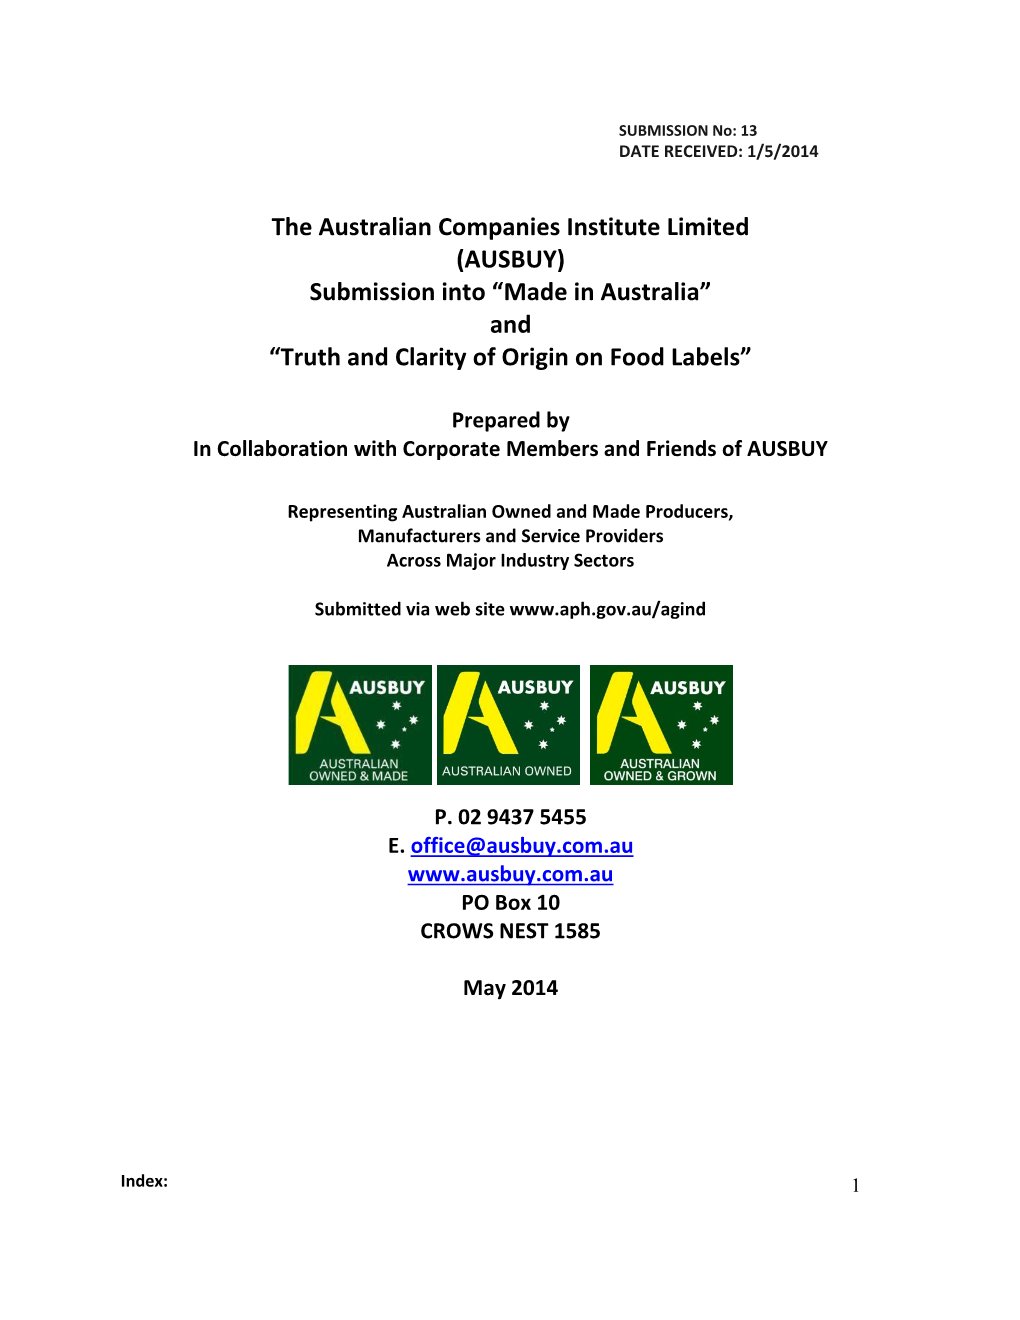 AUSBUY) Submission Into “Made in Australia” and “Truth and Clarity of Origin on Food Labels”